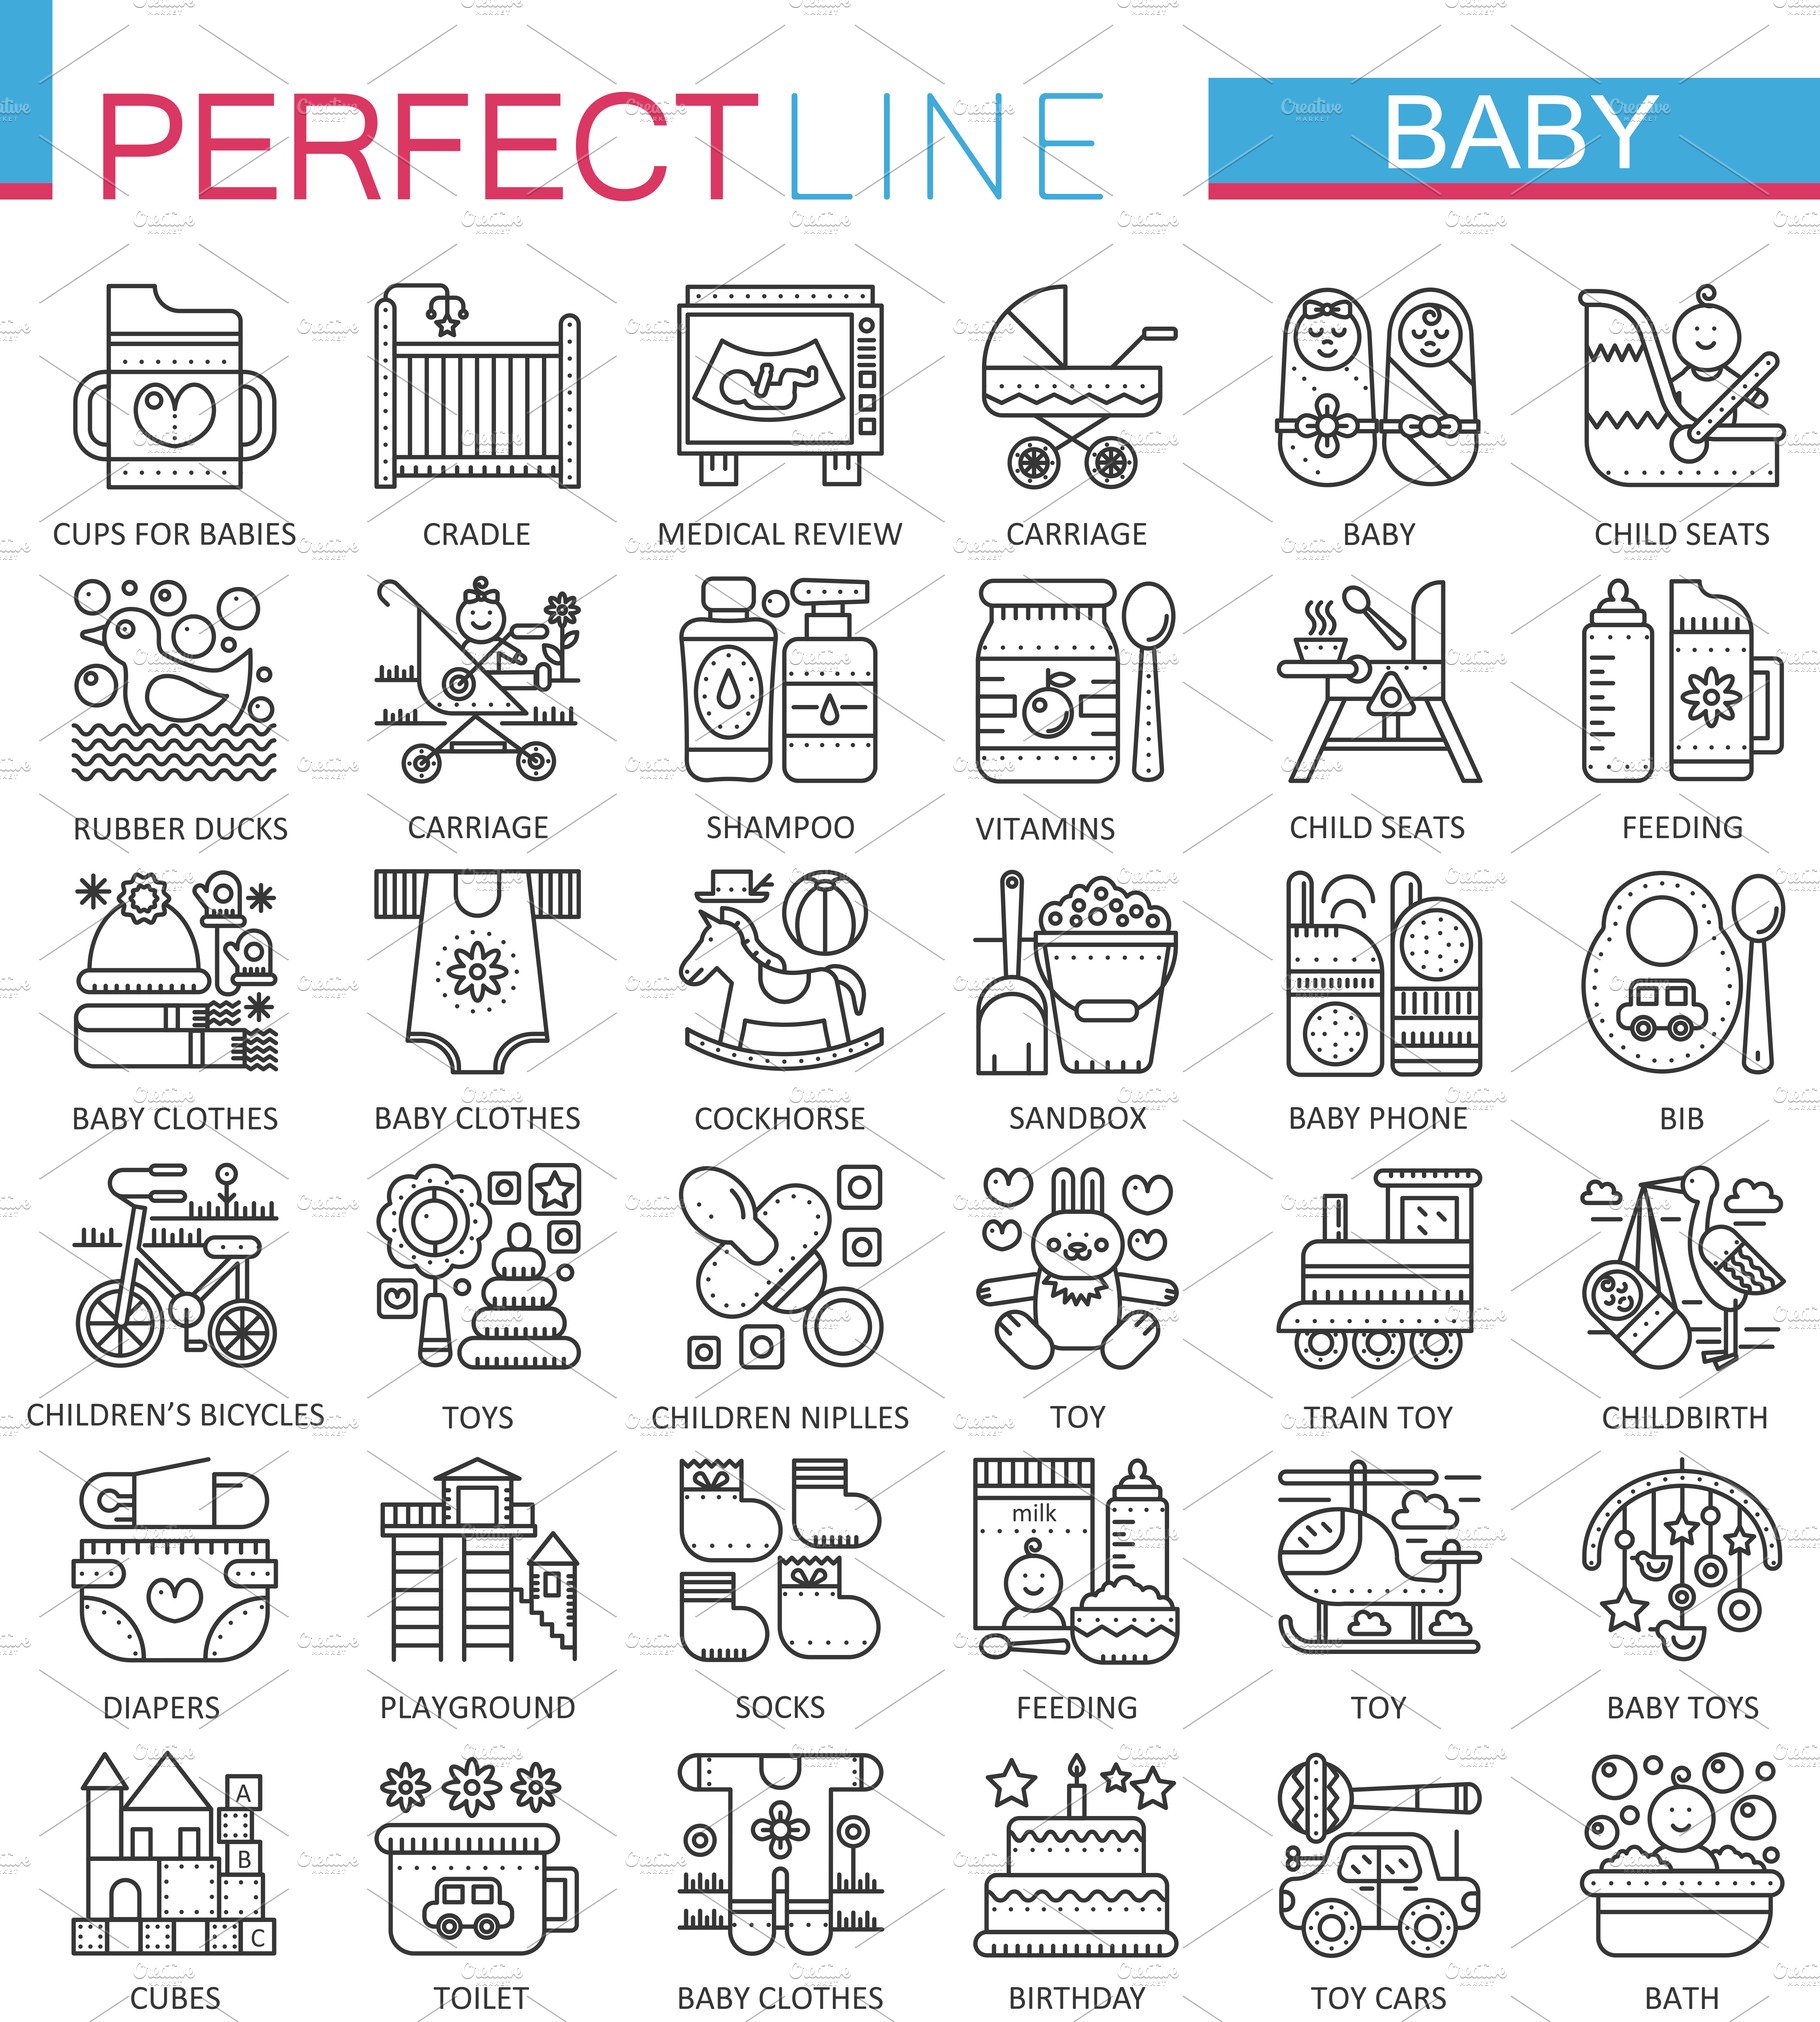 Baby care concept line icons cover image.